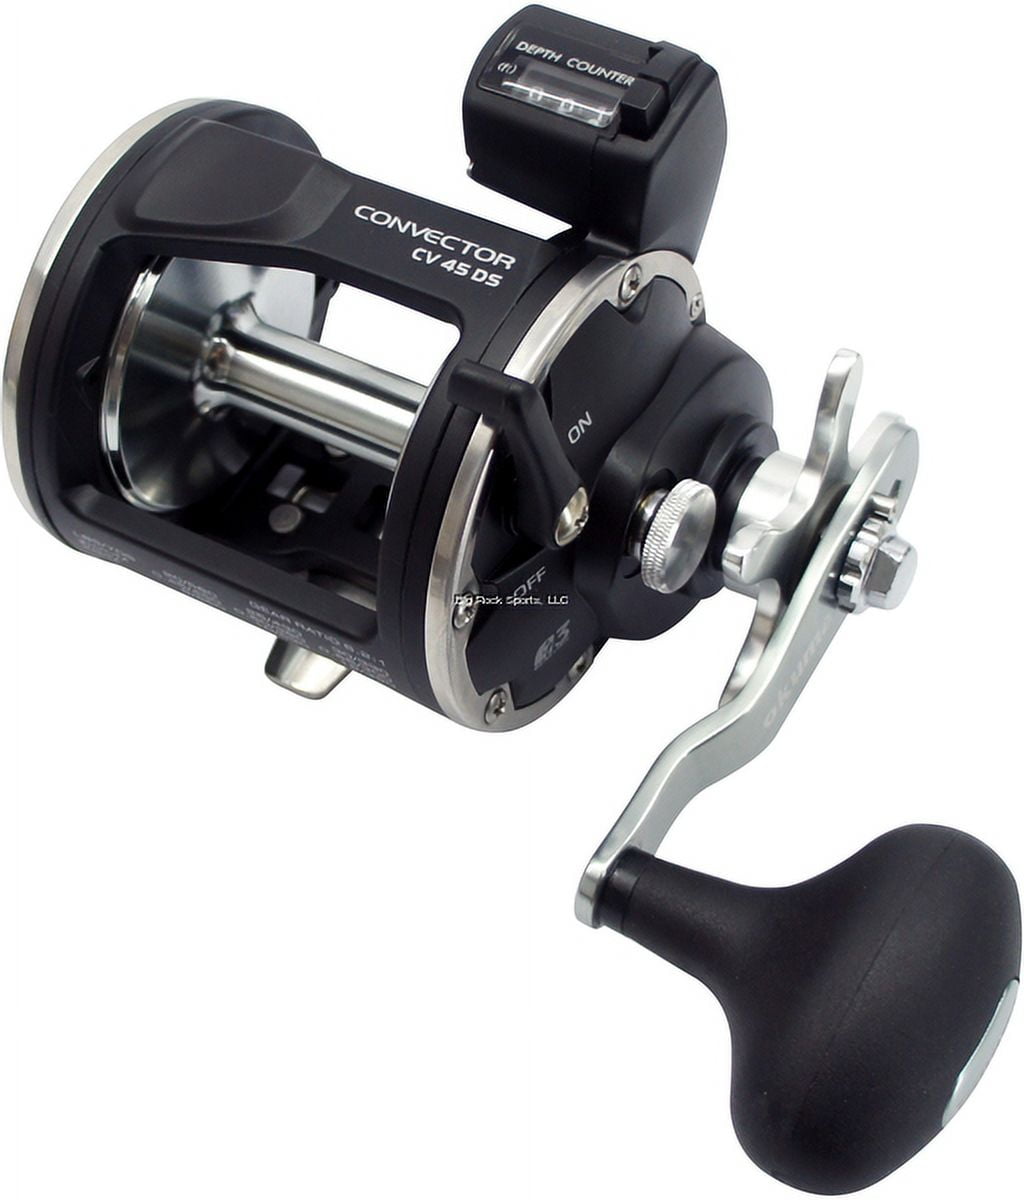 Okuma Convector Star Drag Line Counter 6.2:1 Conventional Fishing Reel,  Right Hand - CV-45DS 